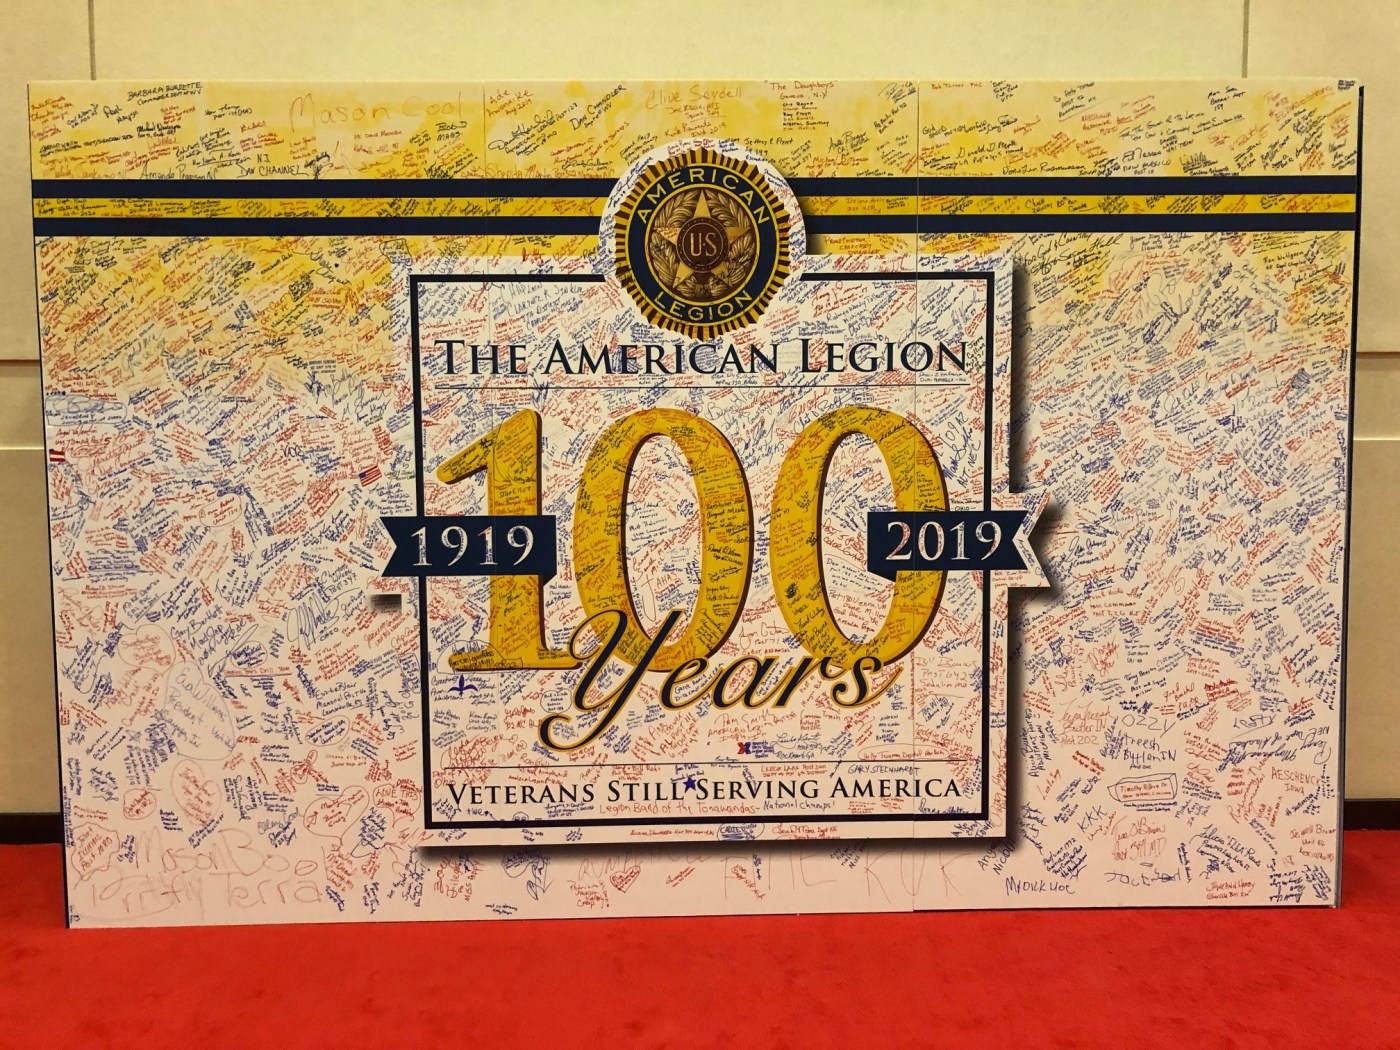 Chance encounters at the American Legion Annual Convention